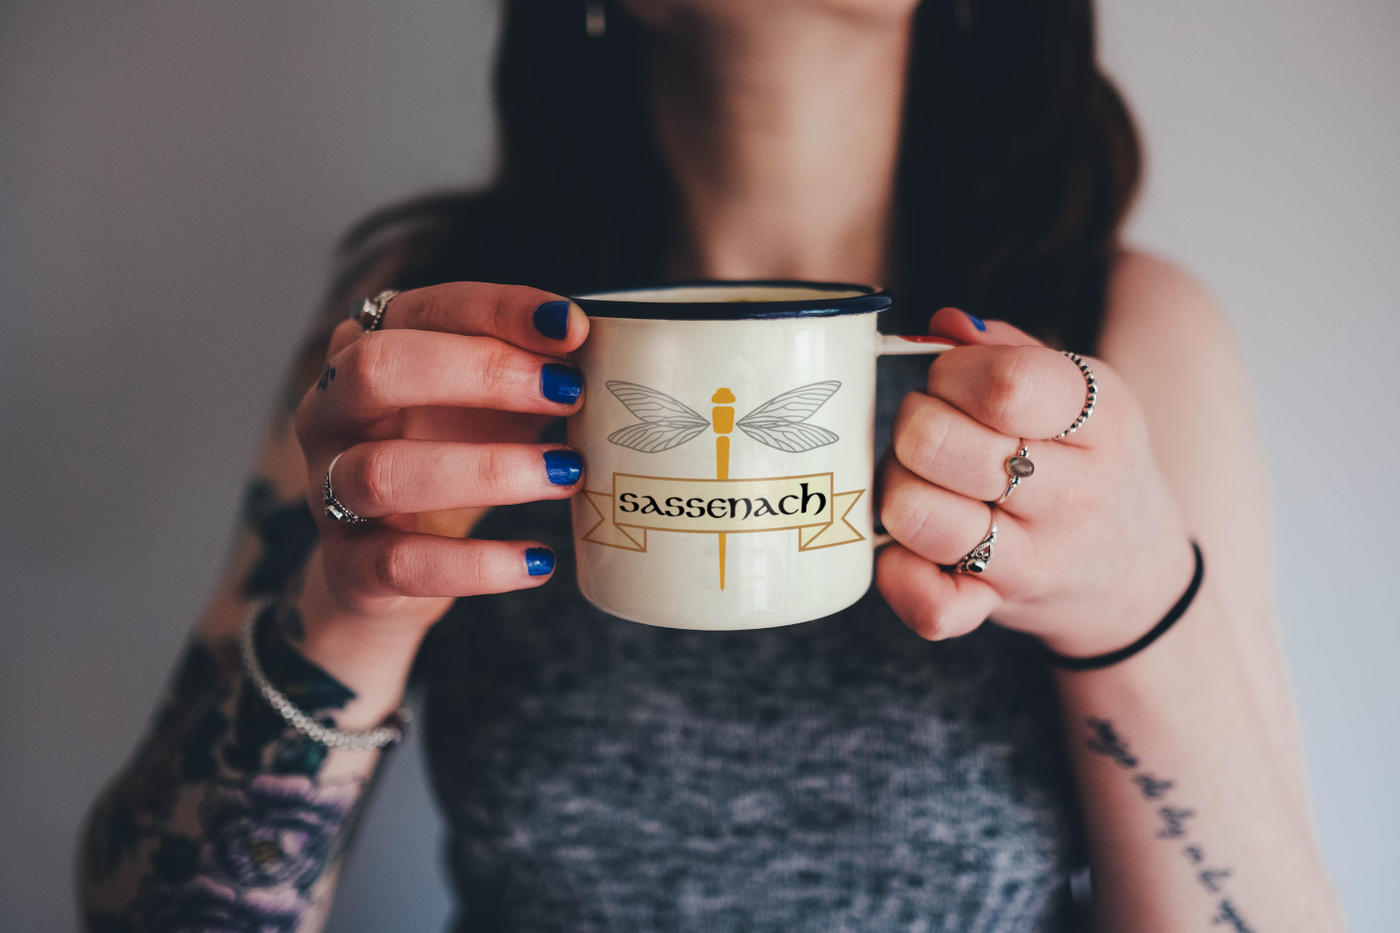 White woman holds a mug that has a dragonfly design with a banner that says "Sassenach"